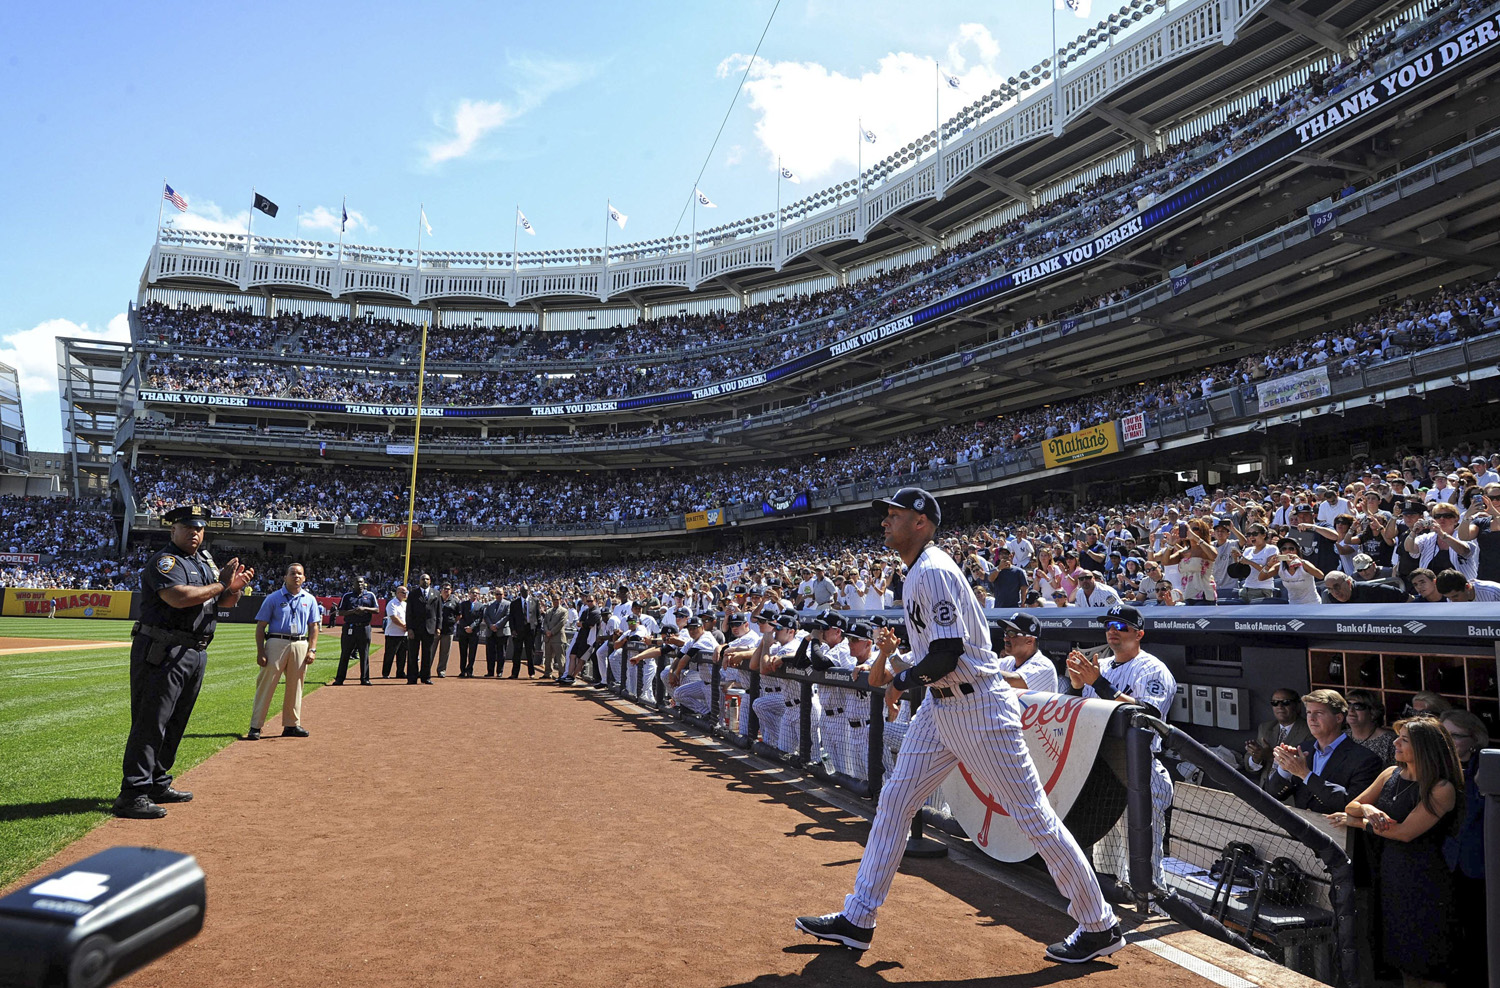 Yankees shortstop Derek Jeter strides onto the field as he is introduced for Derek Jeter Day events.